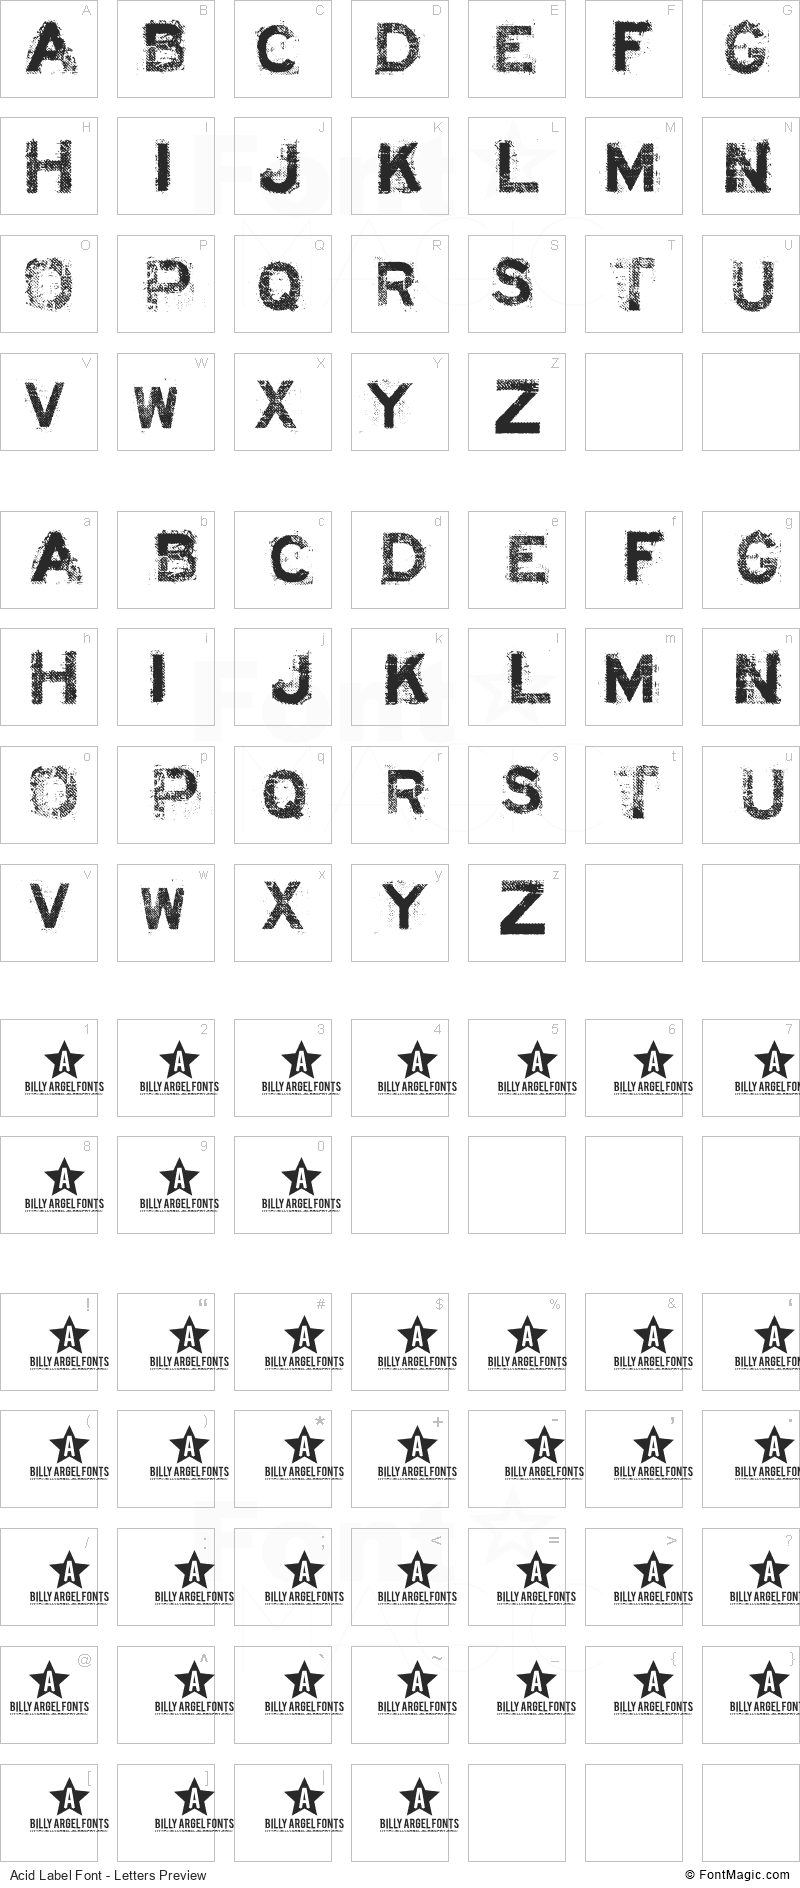 Acid Label Font - All Latters Preview Chart